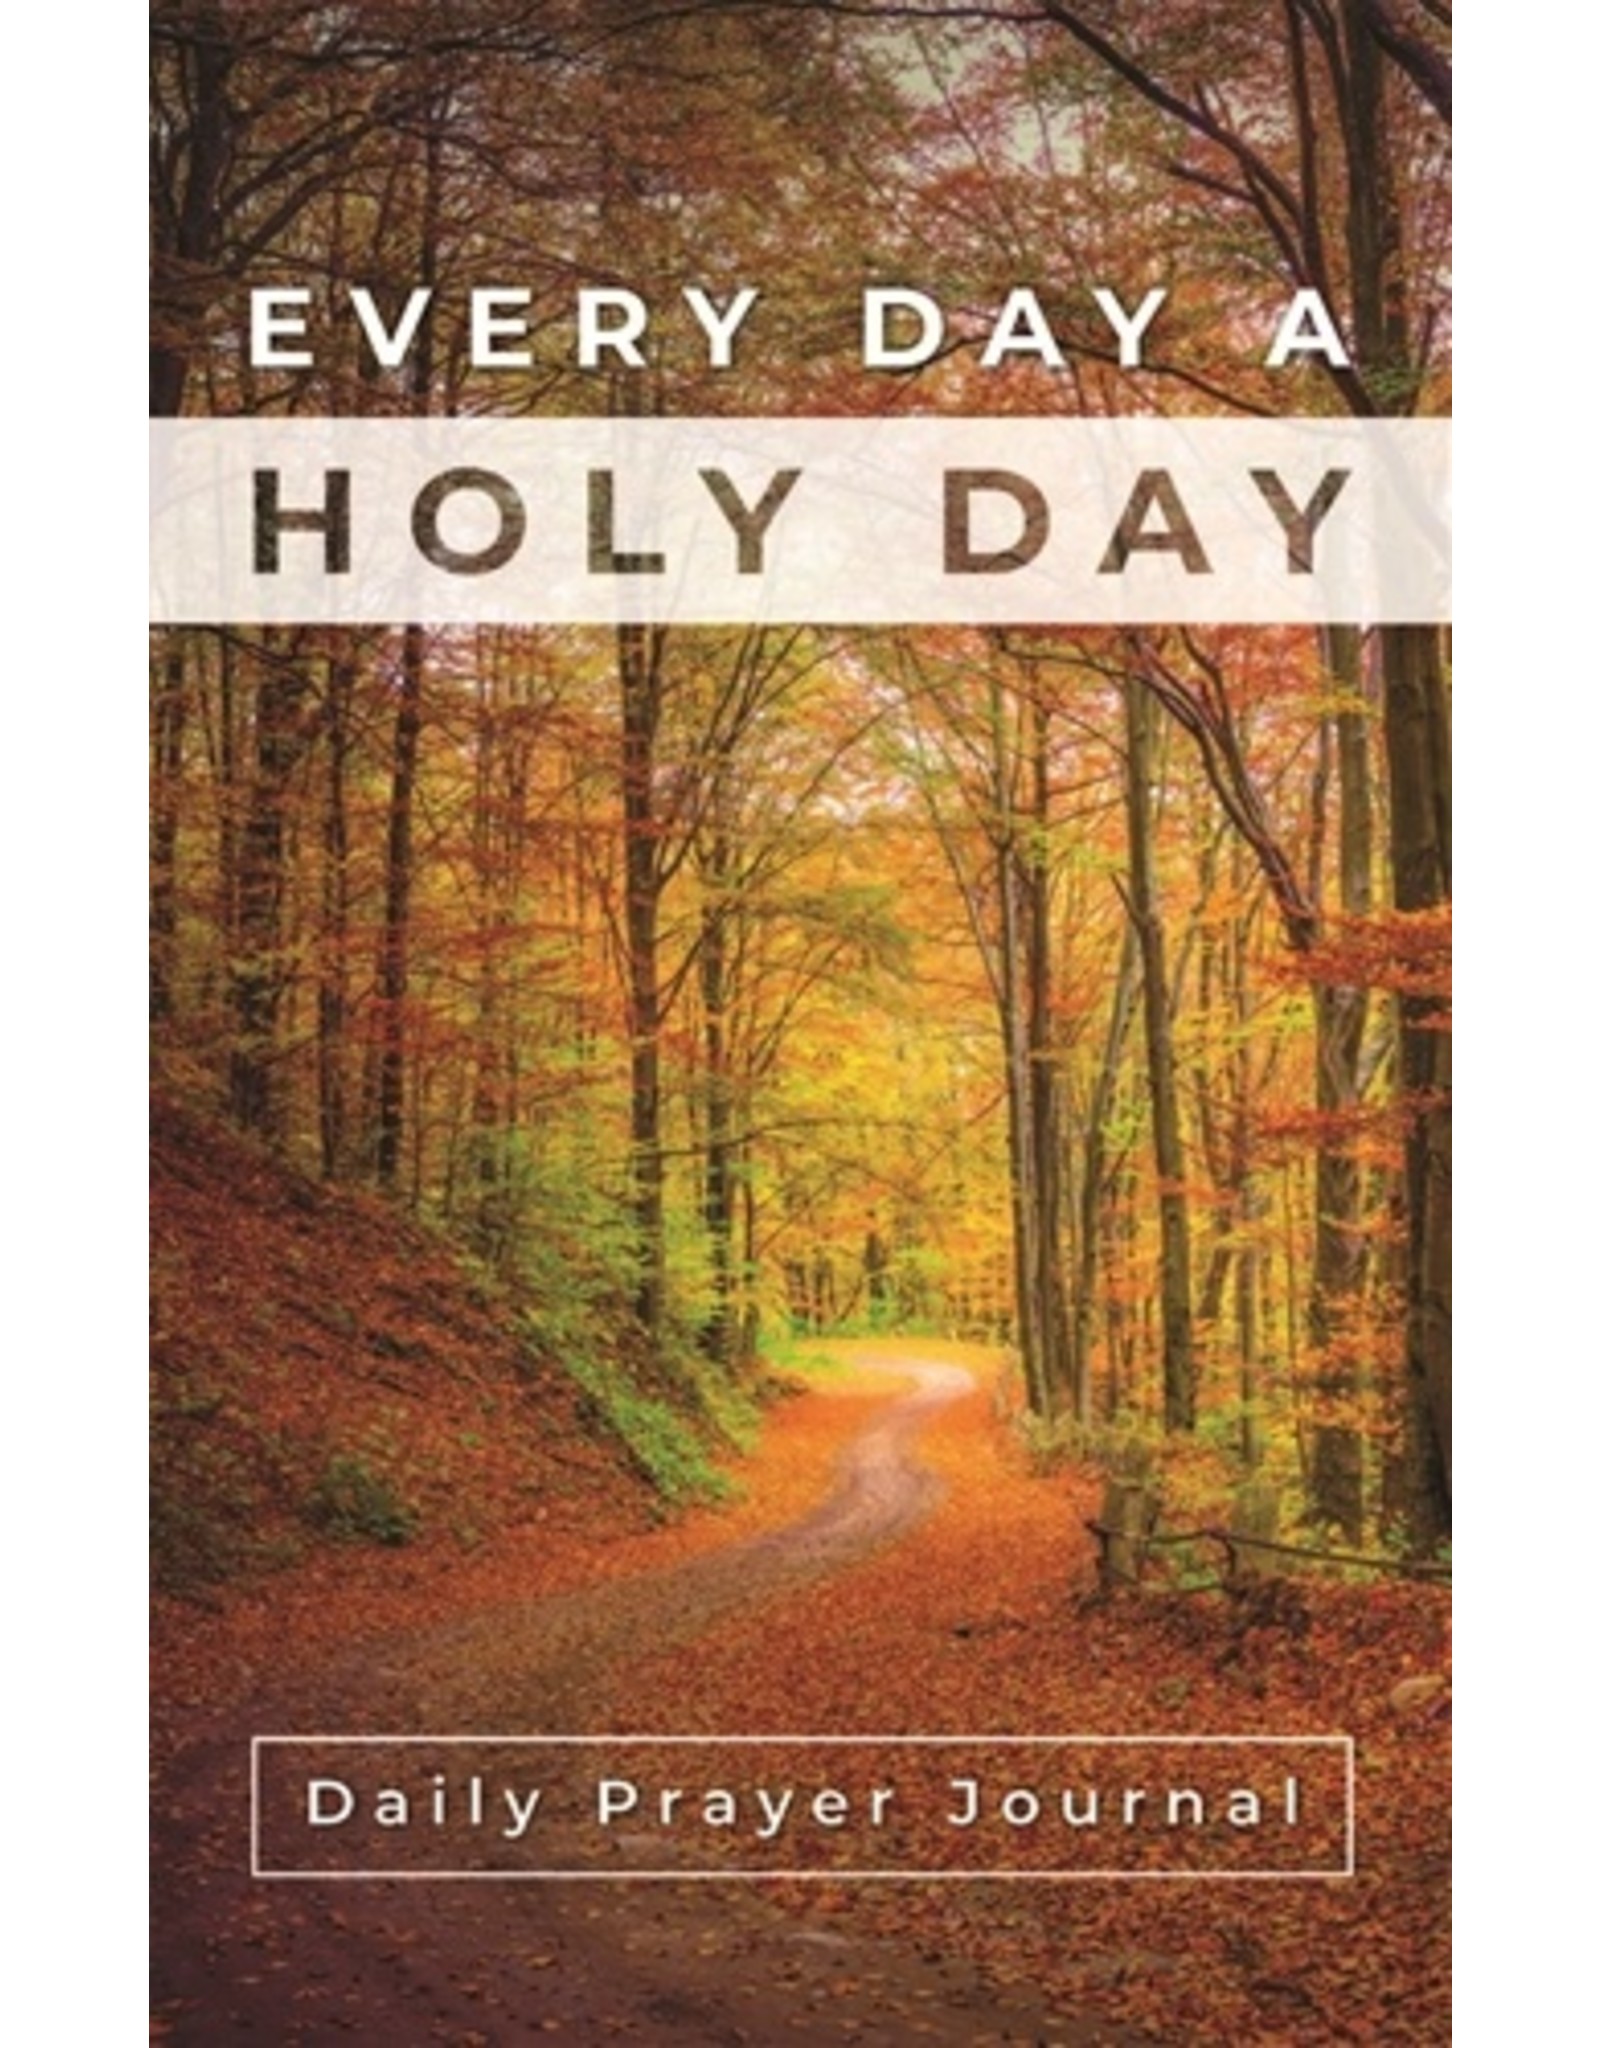 Prayer Journal - Every Day a Holy Day (oop)